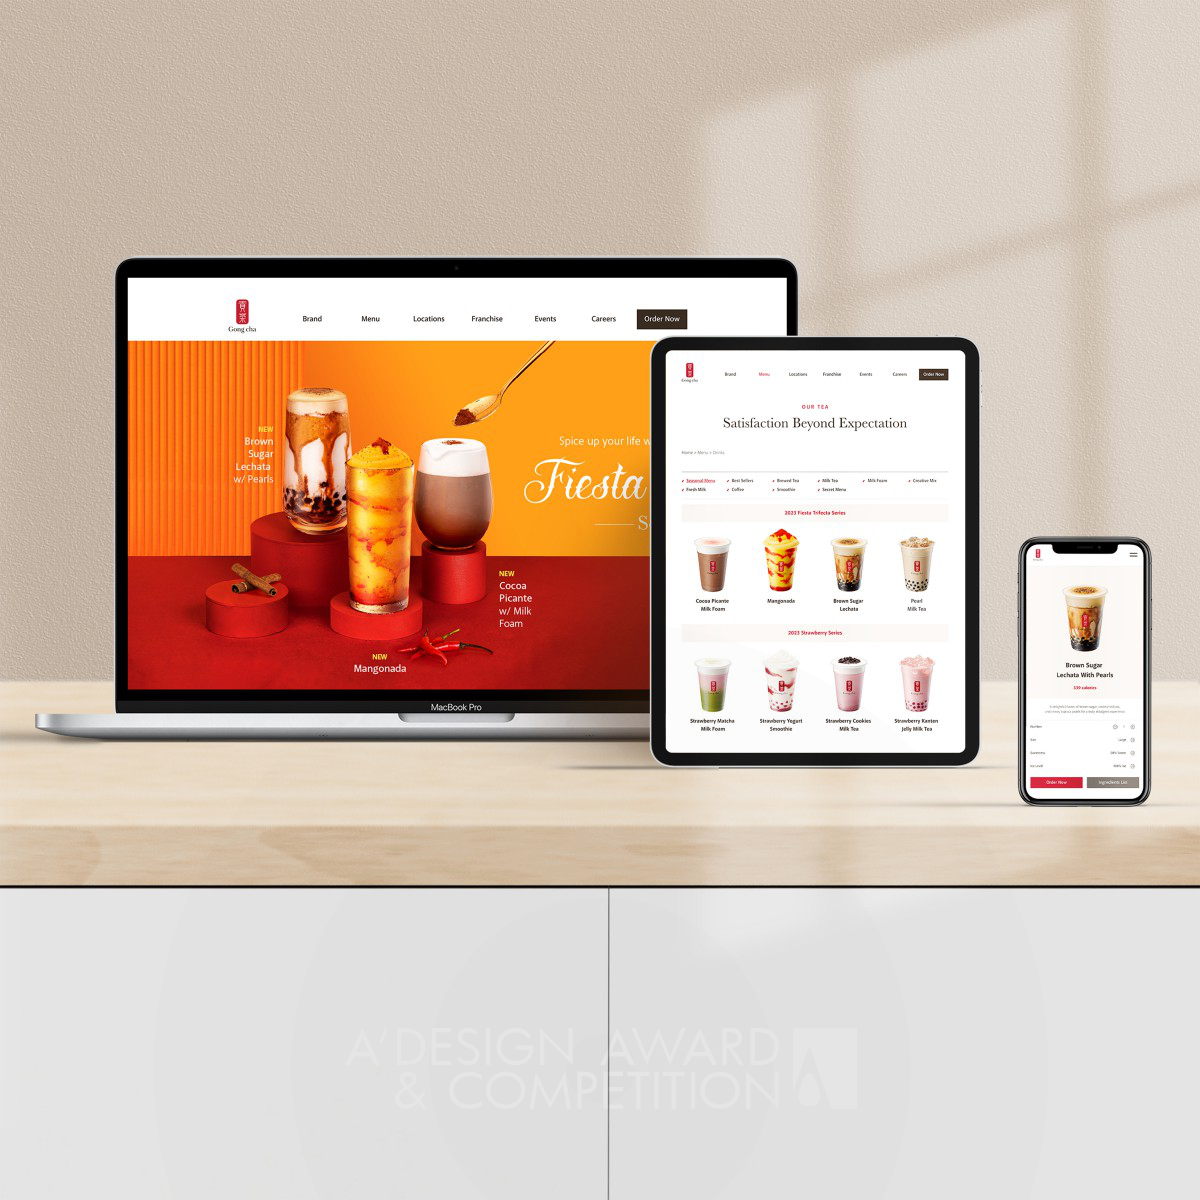 Gong Cha USA CA wins Silver at the prestigious A' Website and Web Design Awards with Brewing Happiness Responsive Website.